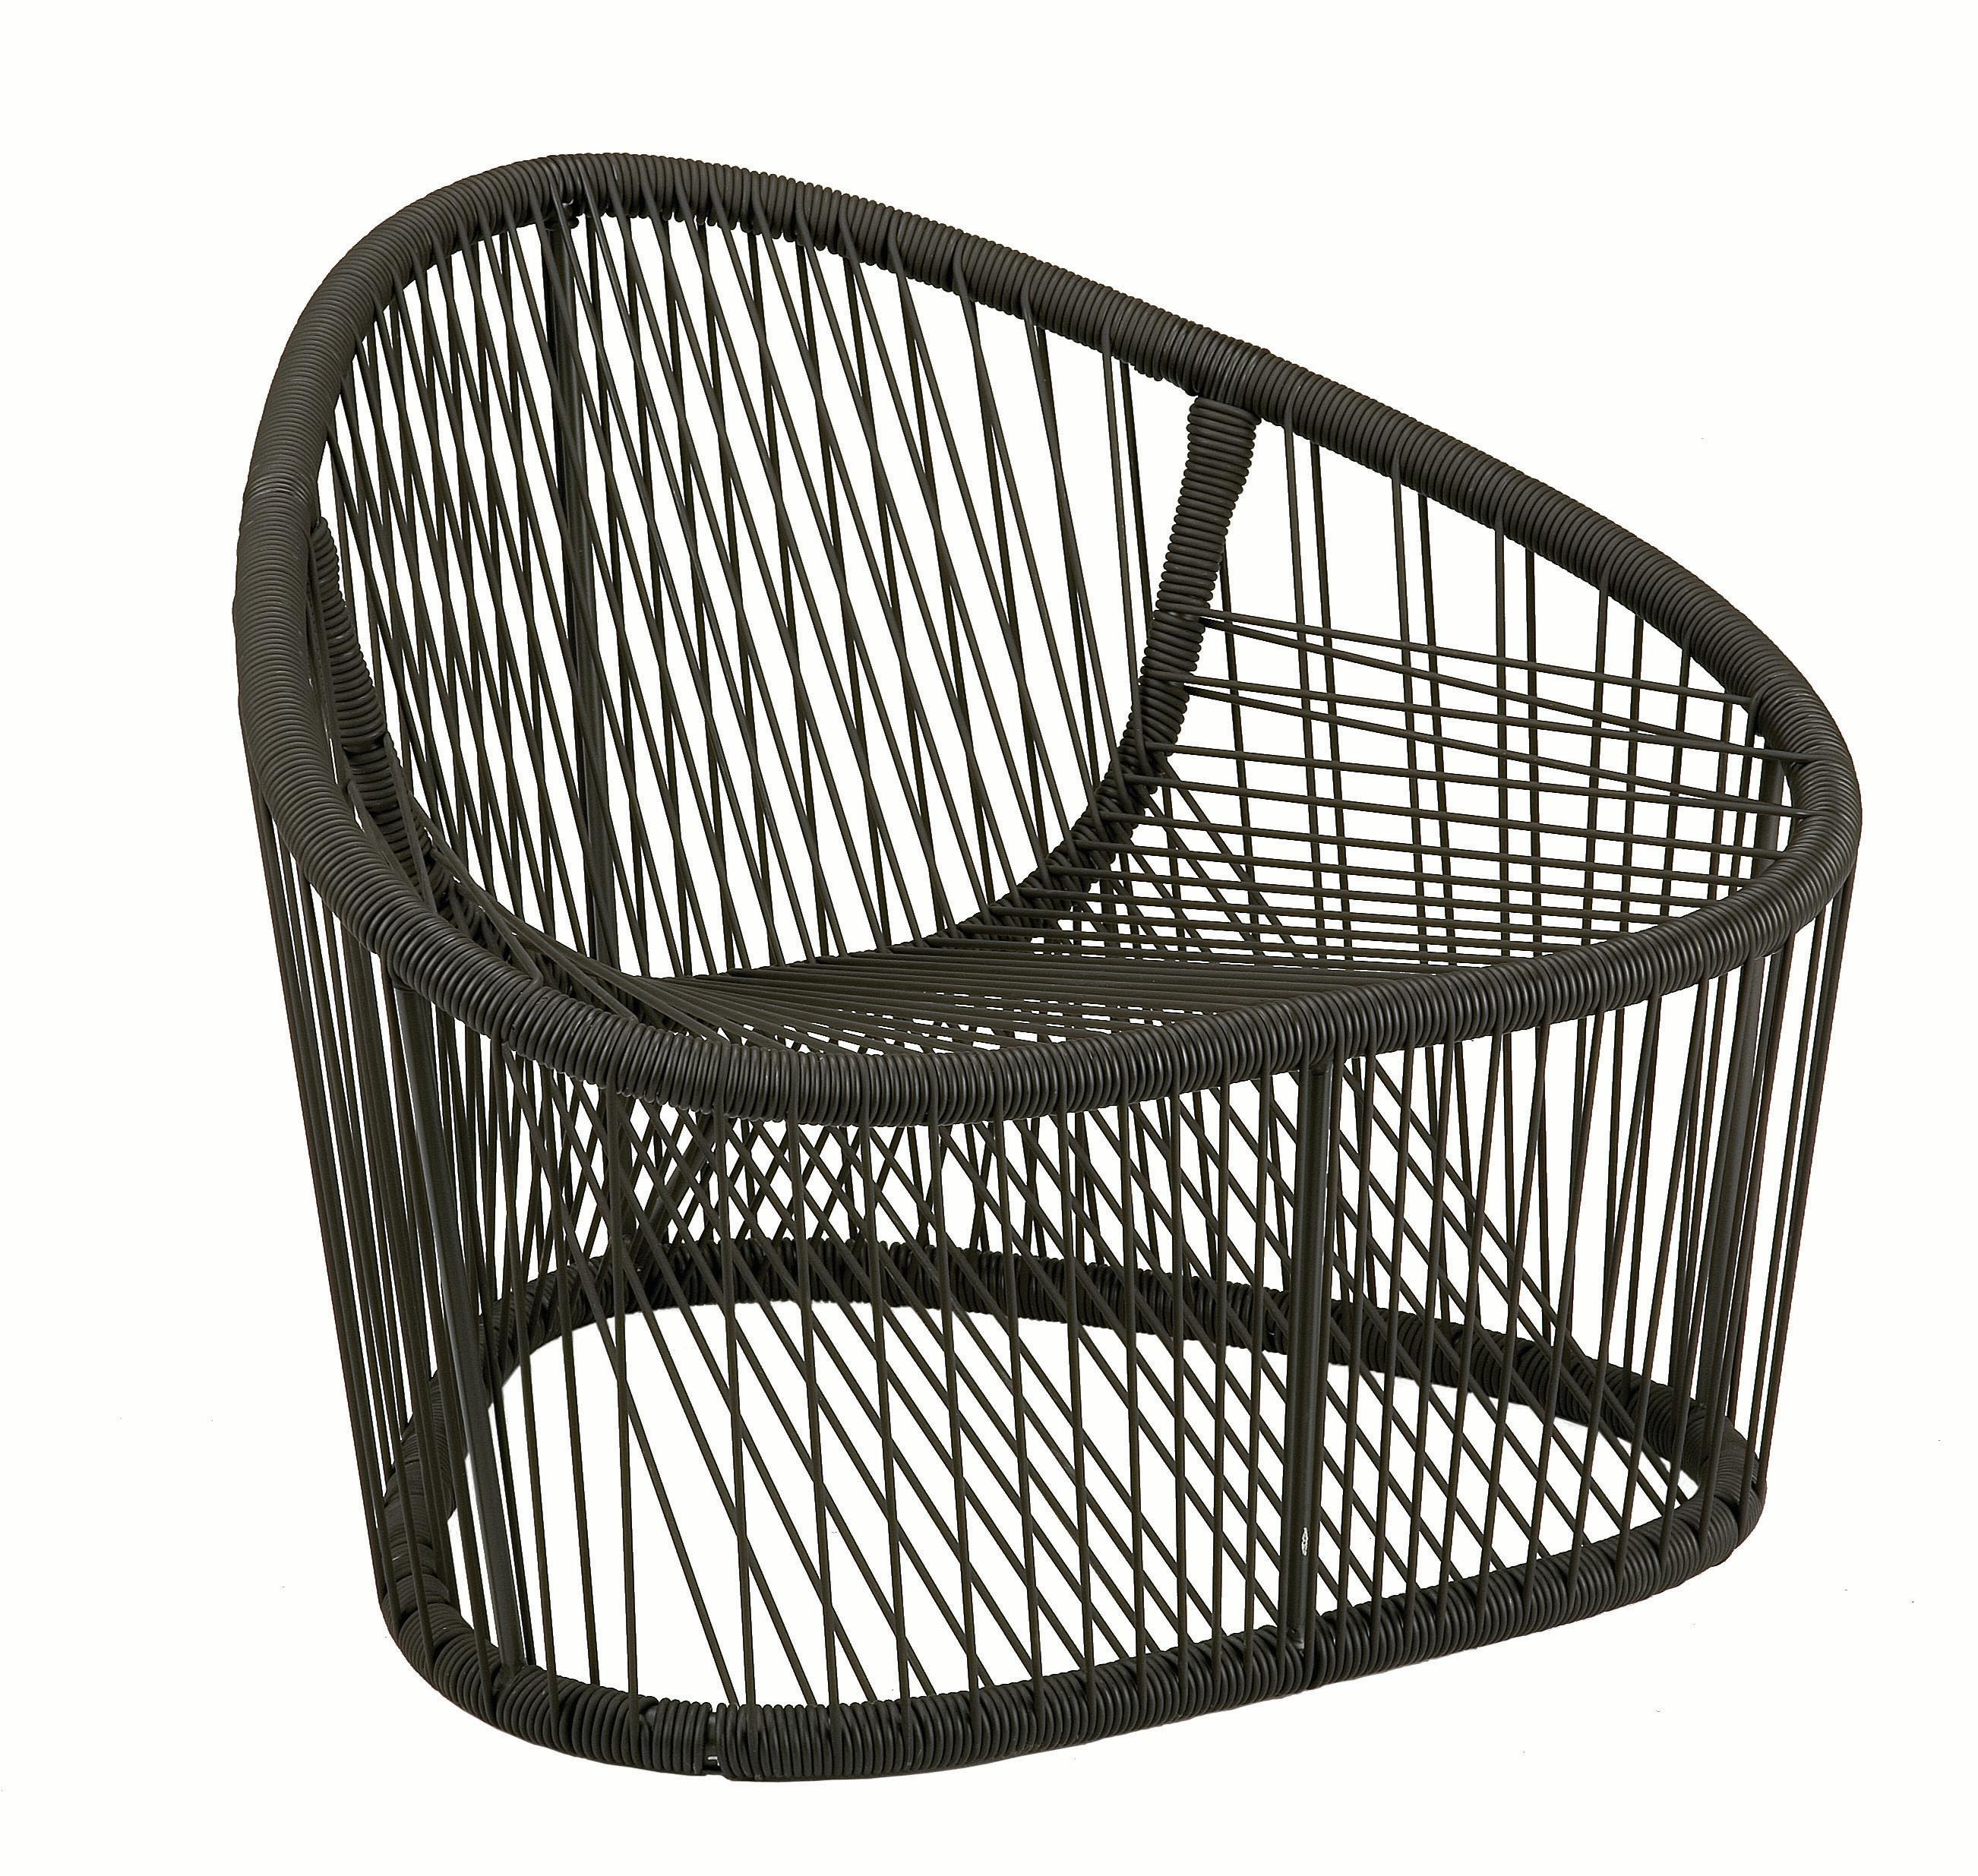 Zanotta Club Armchair in Painted Steel Internal Structure and PVC Thread Weave by Prospero Rasulo

Painted steel internal structure. Weave in PVC thread with nylon internal reinforcement, in the shade of brown.

Additional Information:
Material: